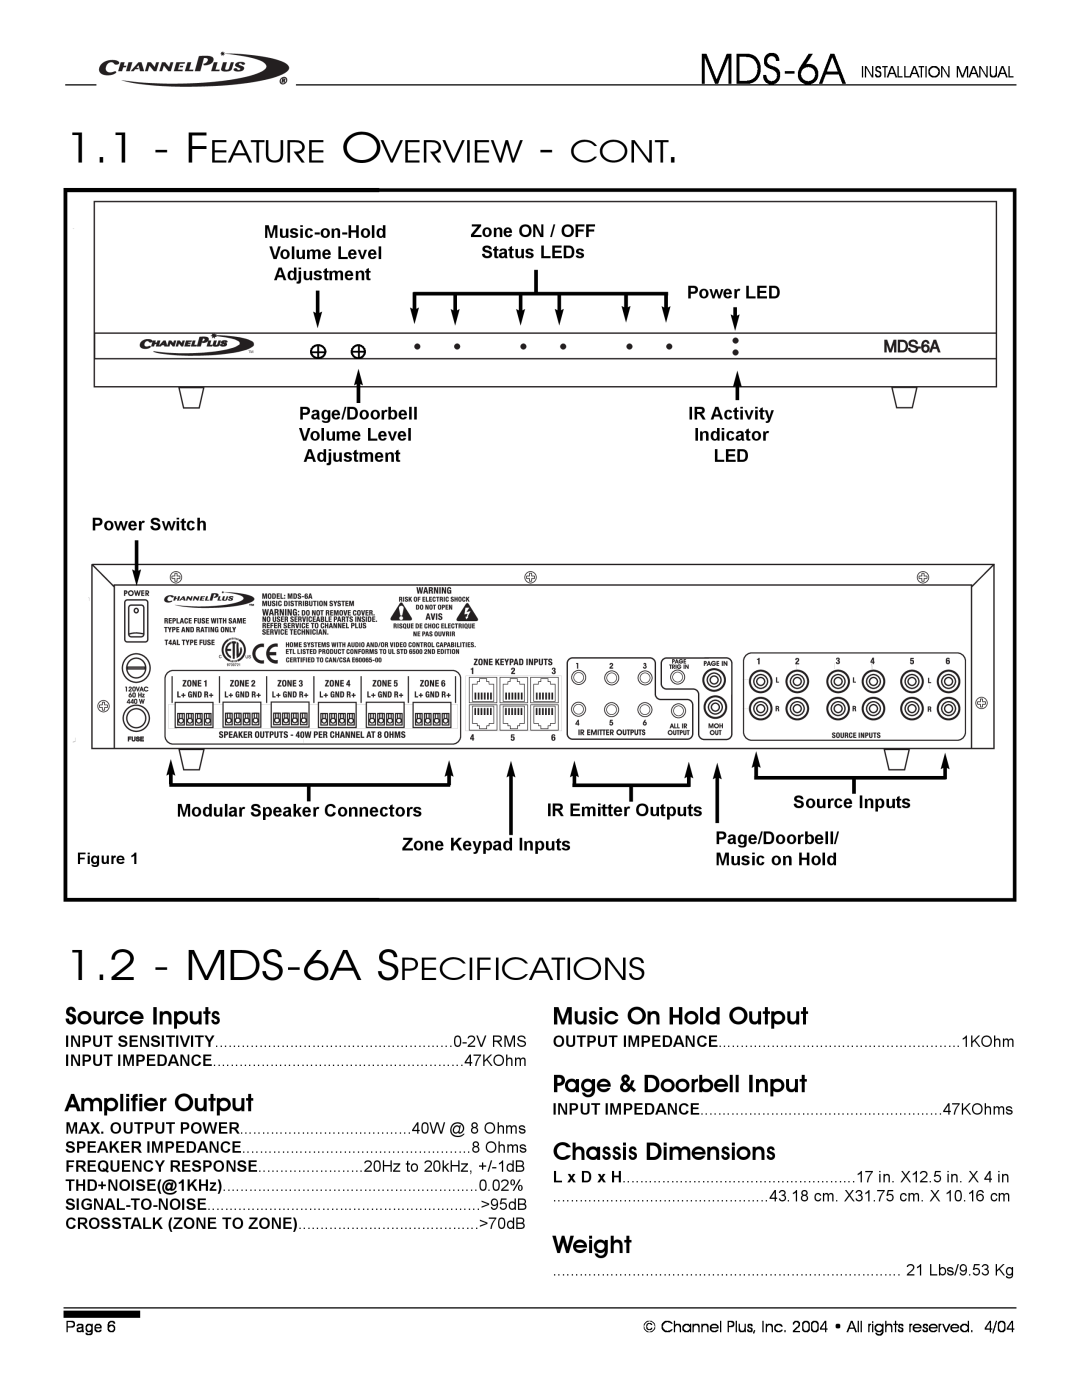 Channel Plus Feature Overview - Cont, MDS-6ASPECIFICATIONS, Source Inputs, Amplifier Output, Music On Hold Output 